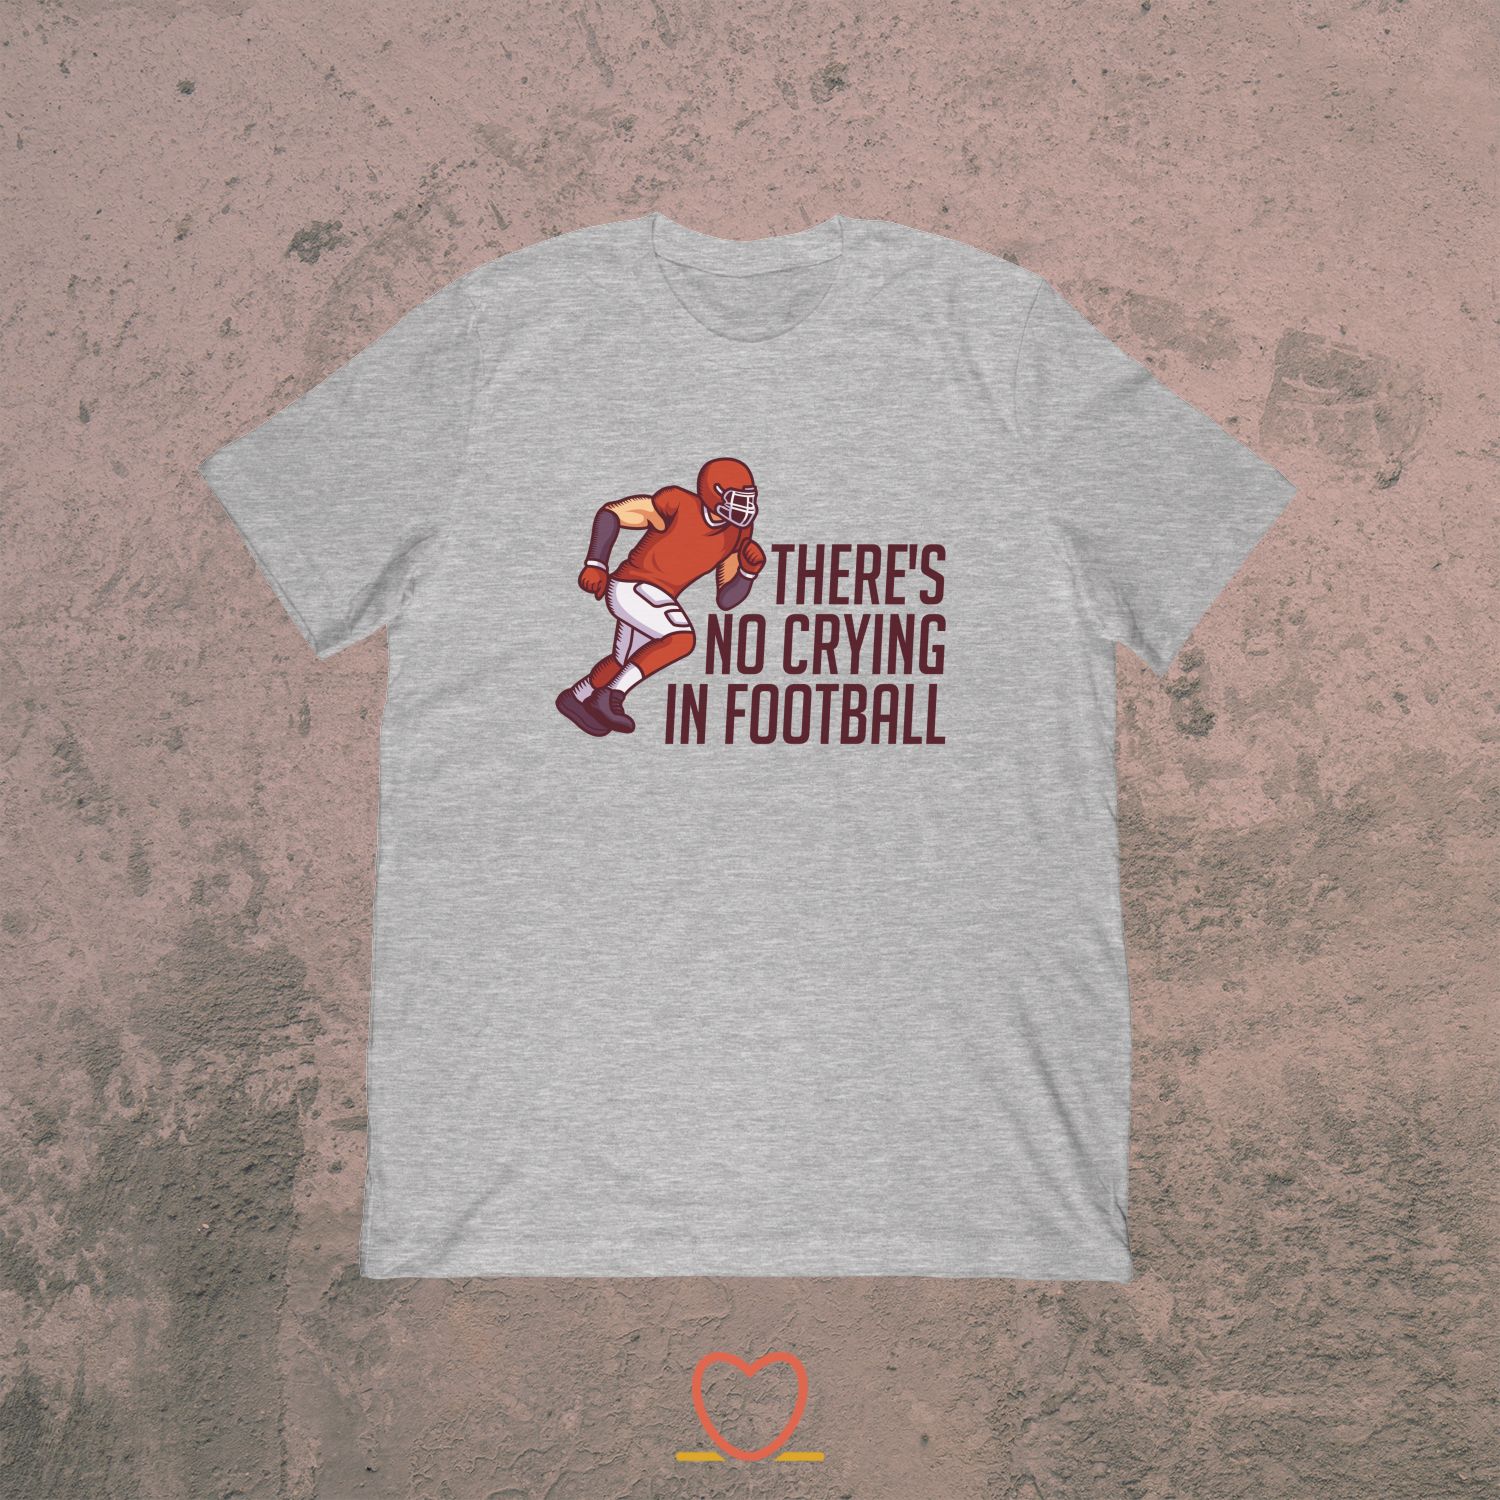 There’s No Crying In Football – Funny US Football Tee